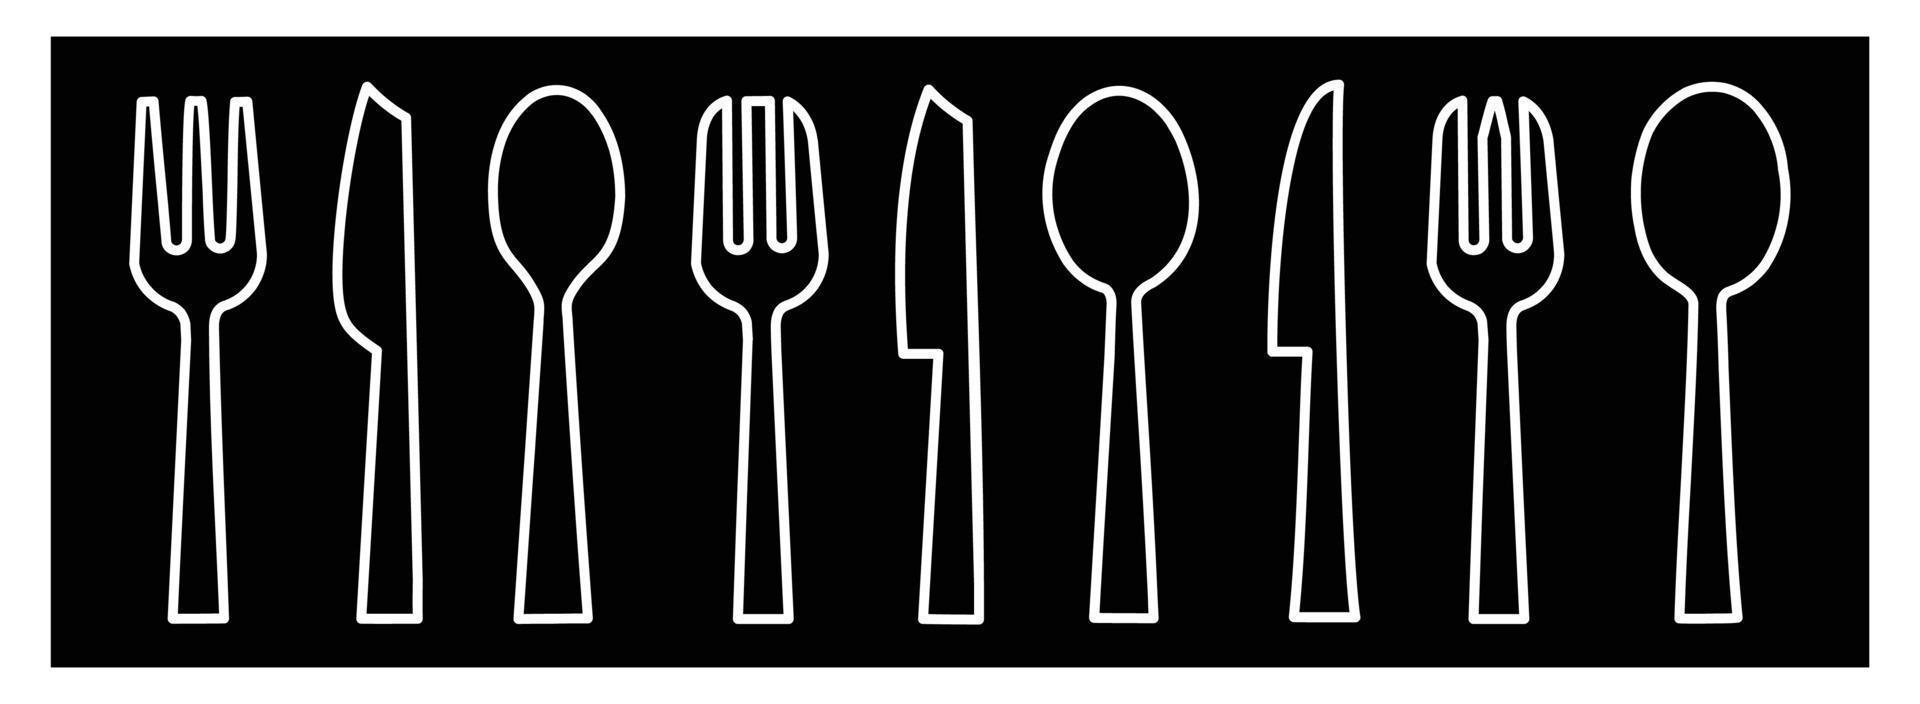 Tableware Vector illustration spoon, Fork, knife, and plate icon set in line style, Dinner service collection form on black background